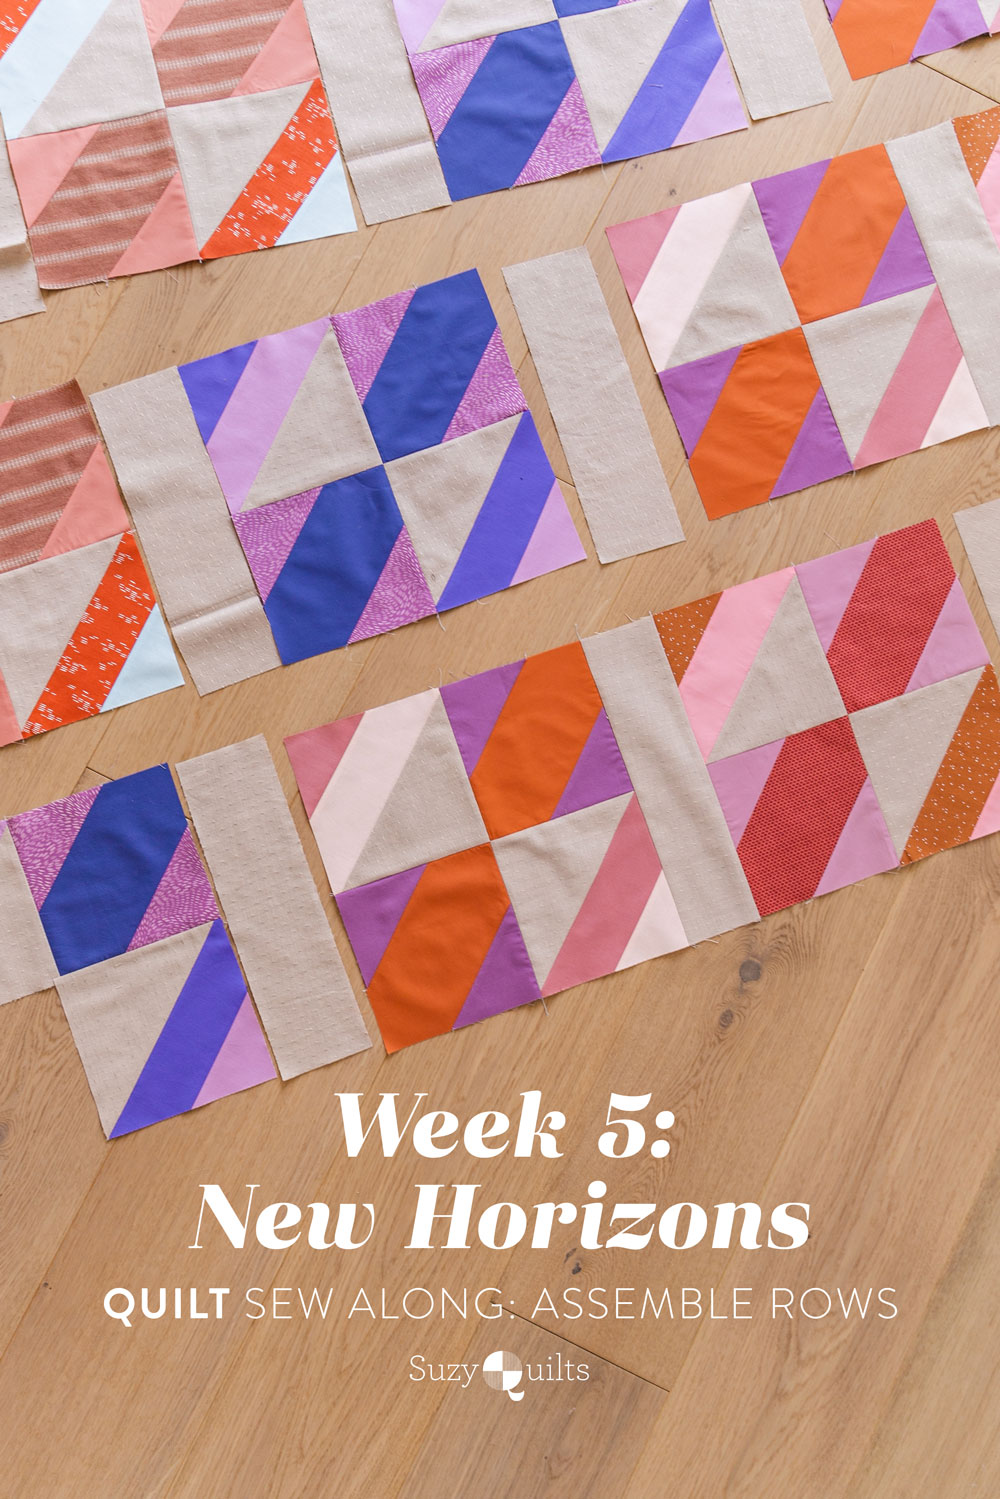 The New Horizons quilt along includes lots of extra instruction and tips in sewing this fat quarter friendly modern throw quilt. suzyquilts.com #quiltpattern #modernquilt